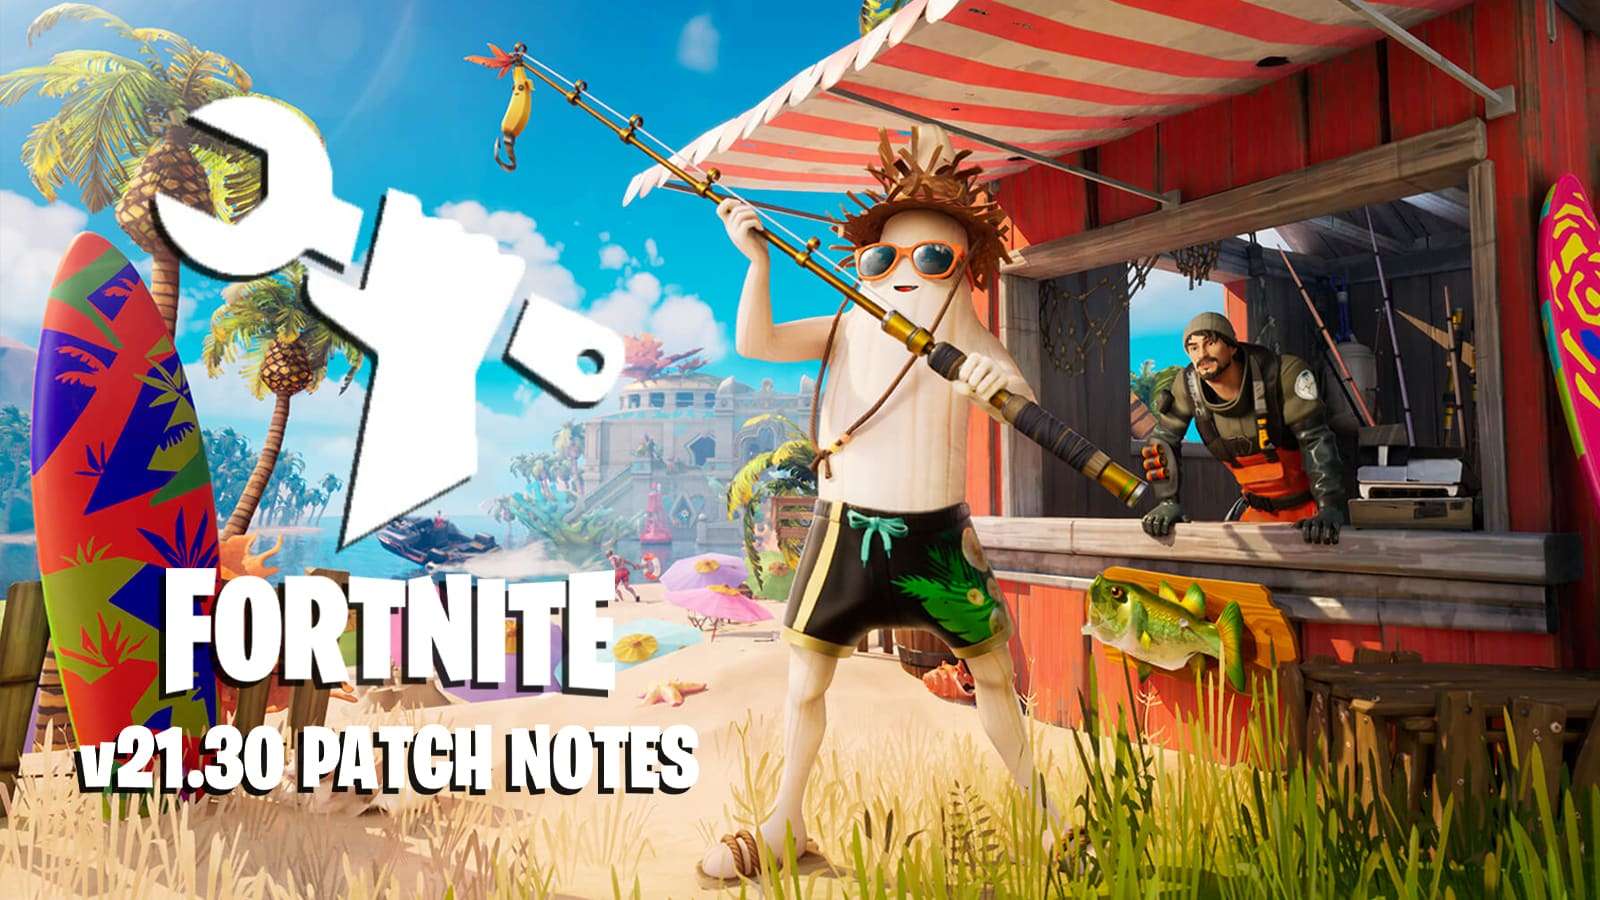 A poster for the summer Fortnite update 21.30 patch notes